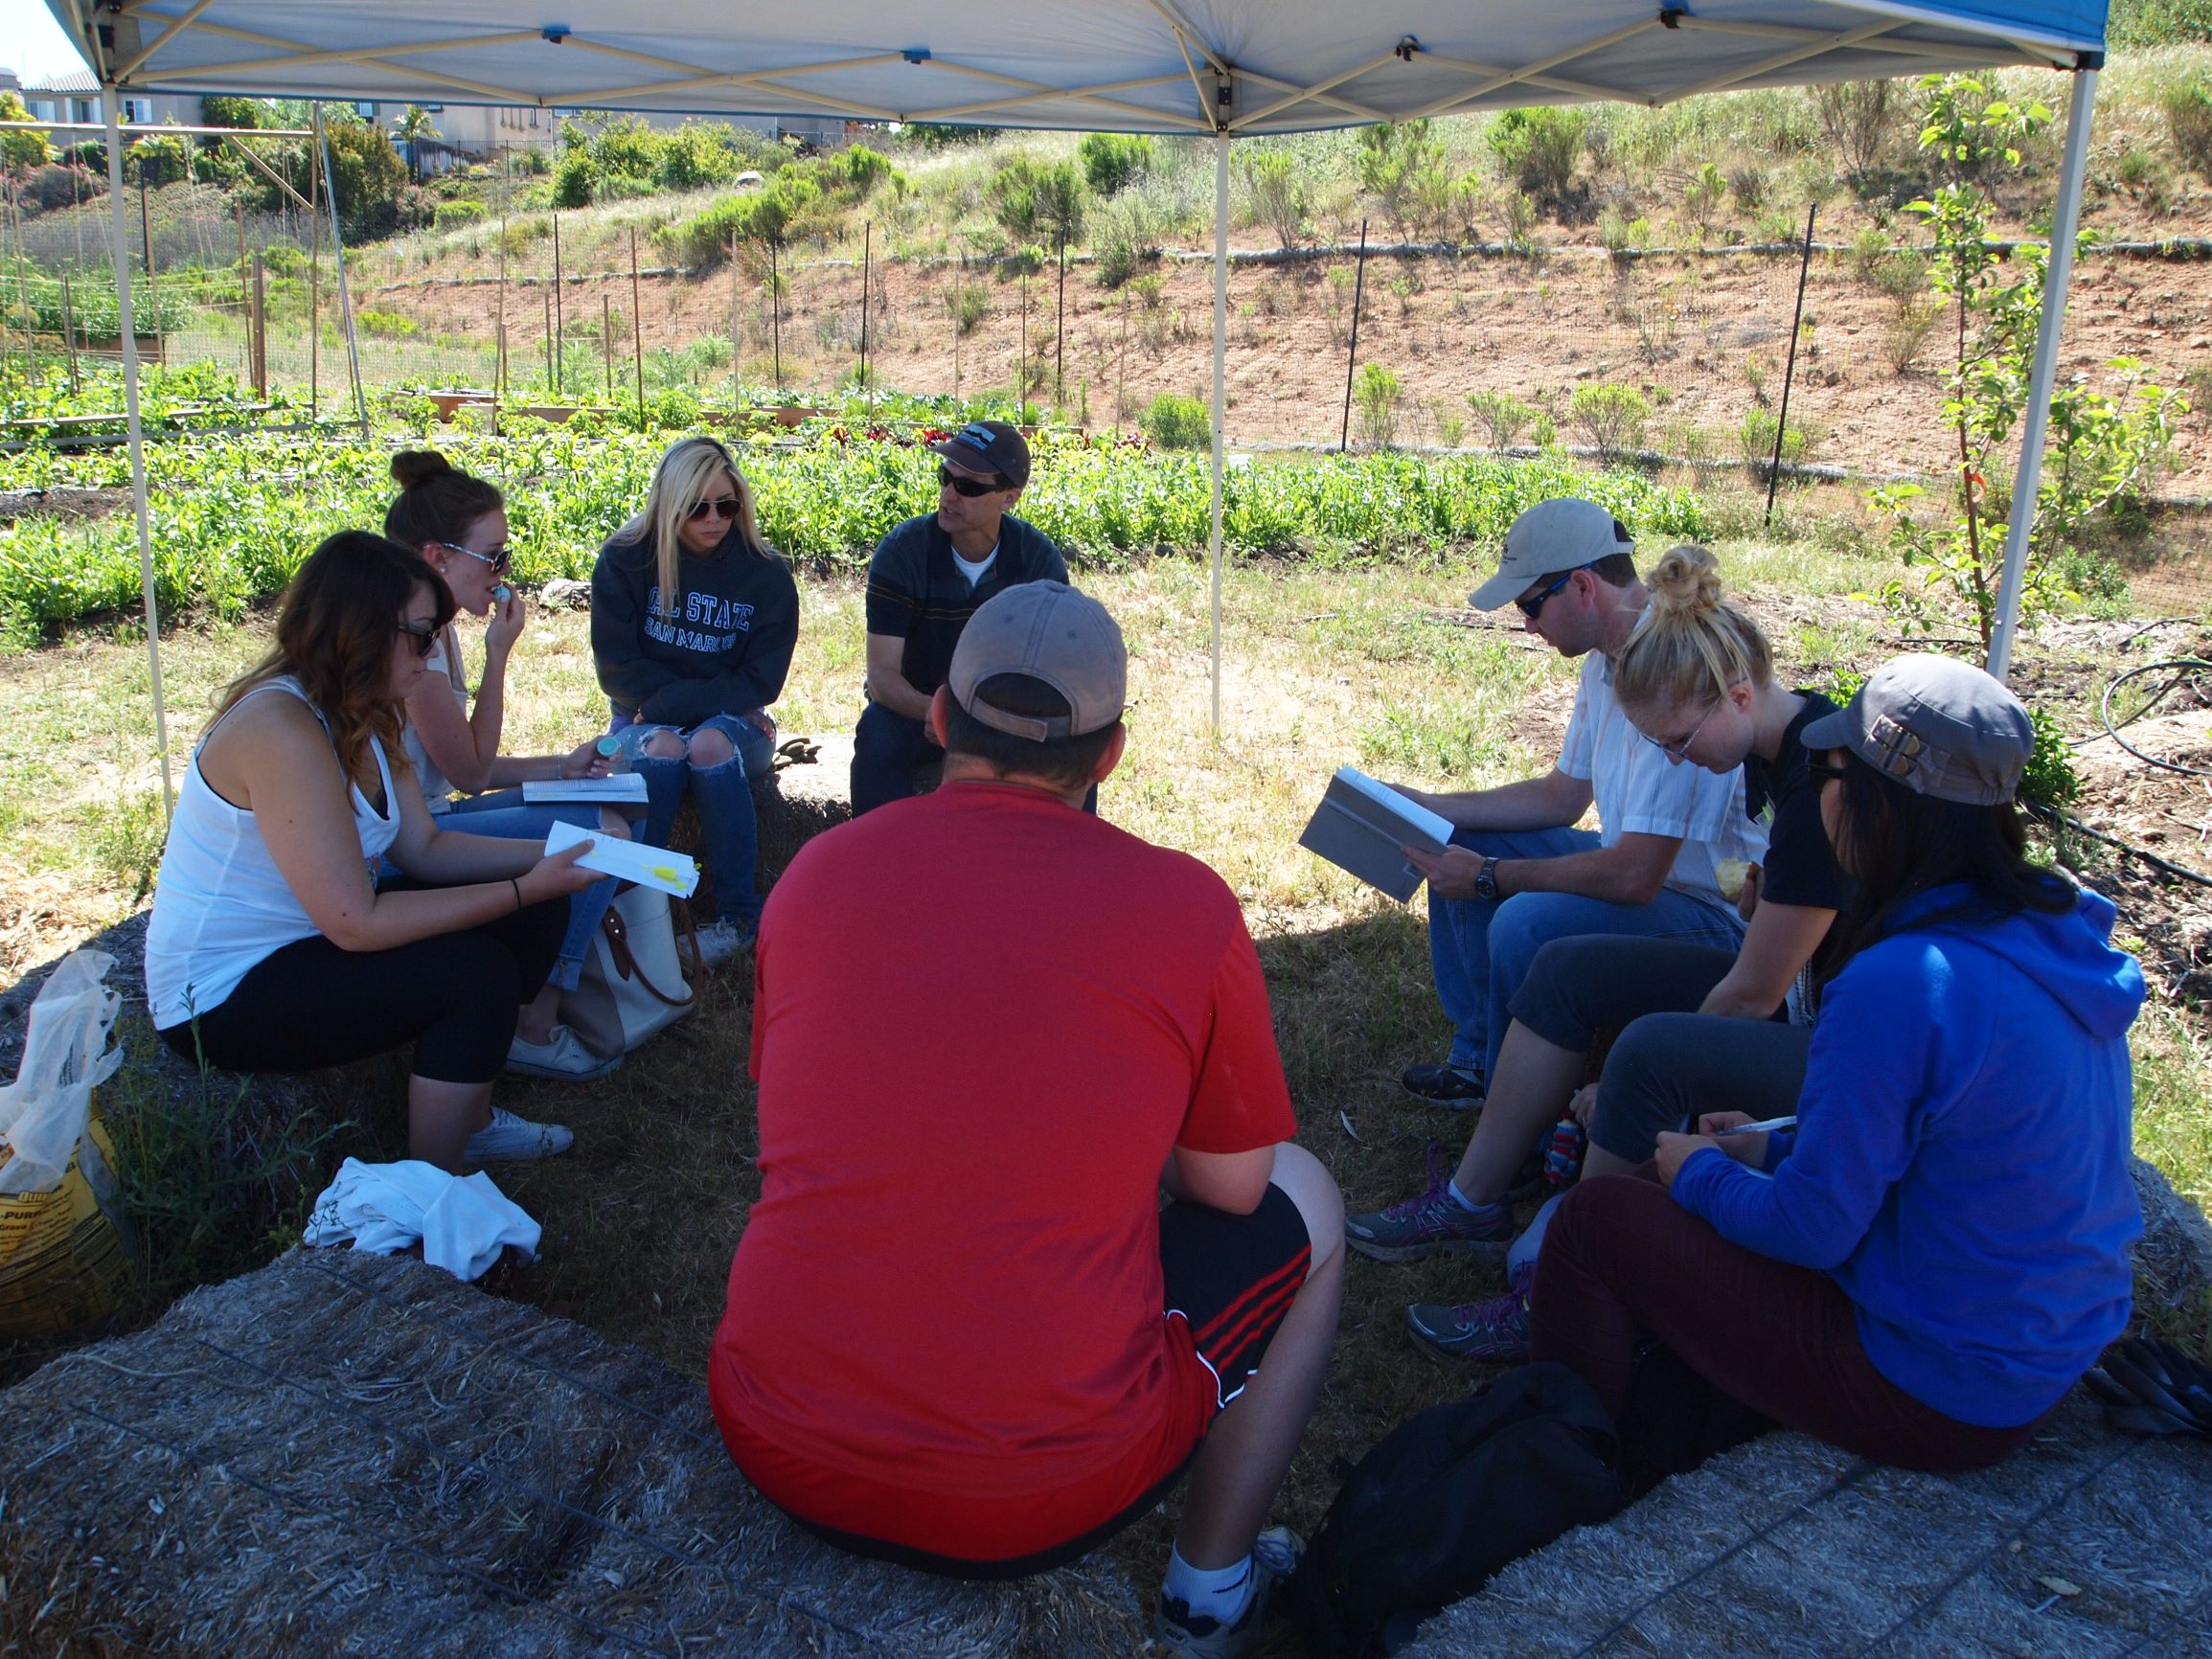 GEOG 460 Food Systems and Emerging Markets class meeting at the sustainable food garden